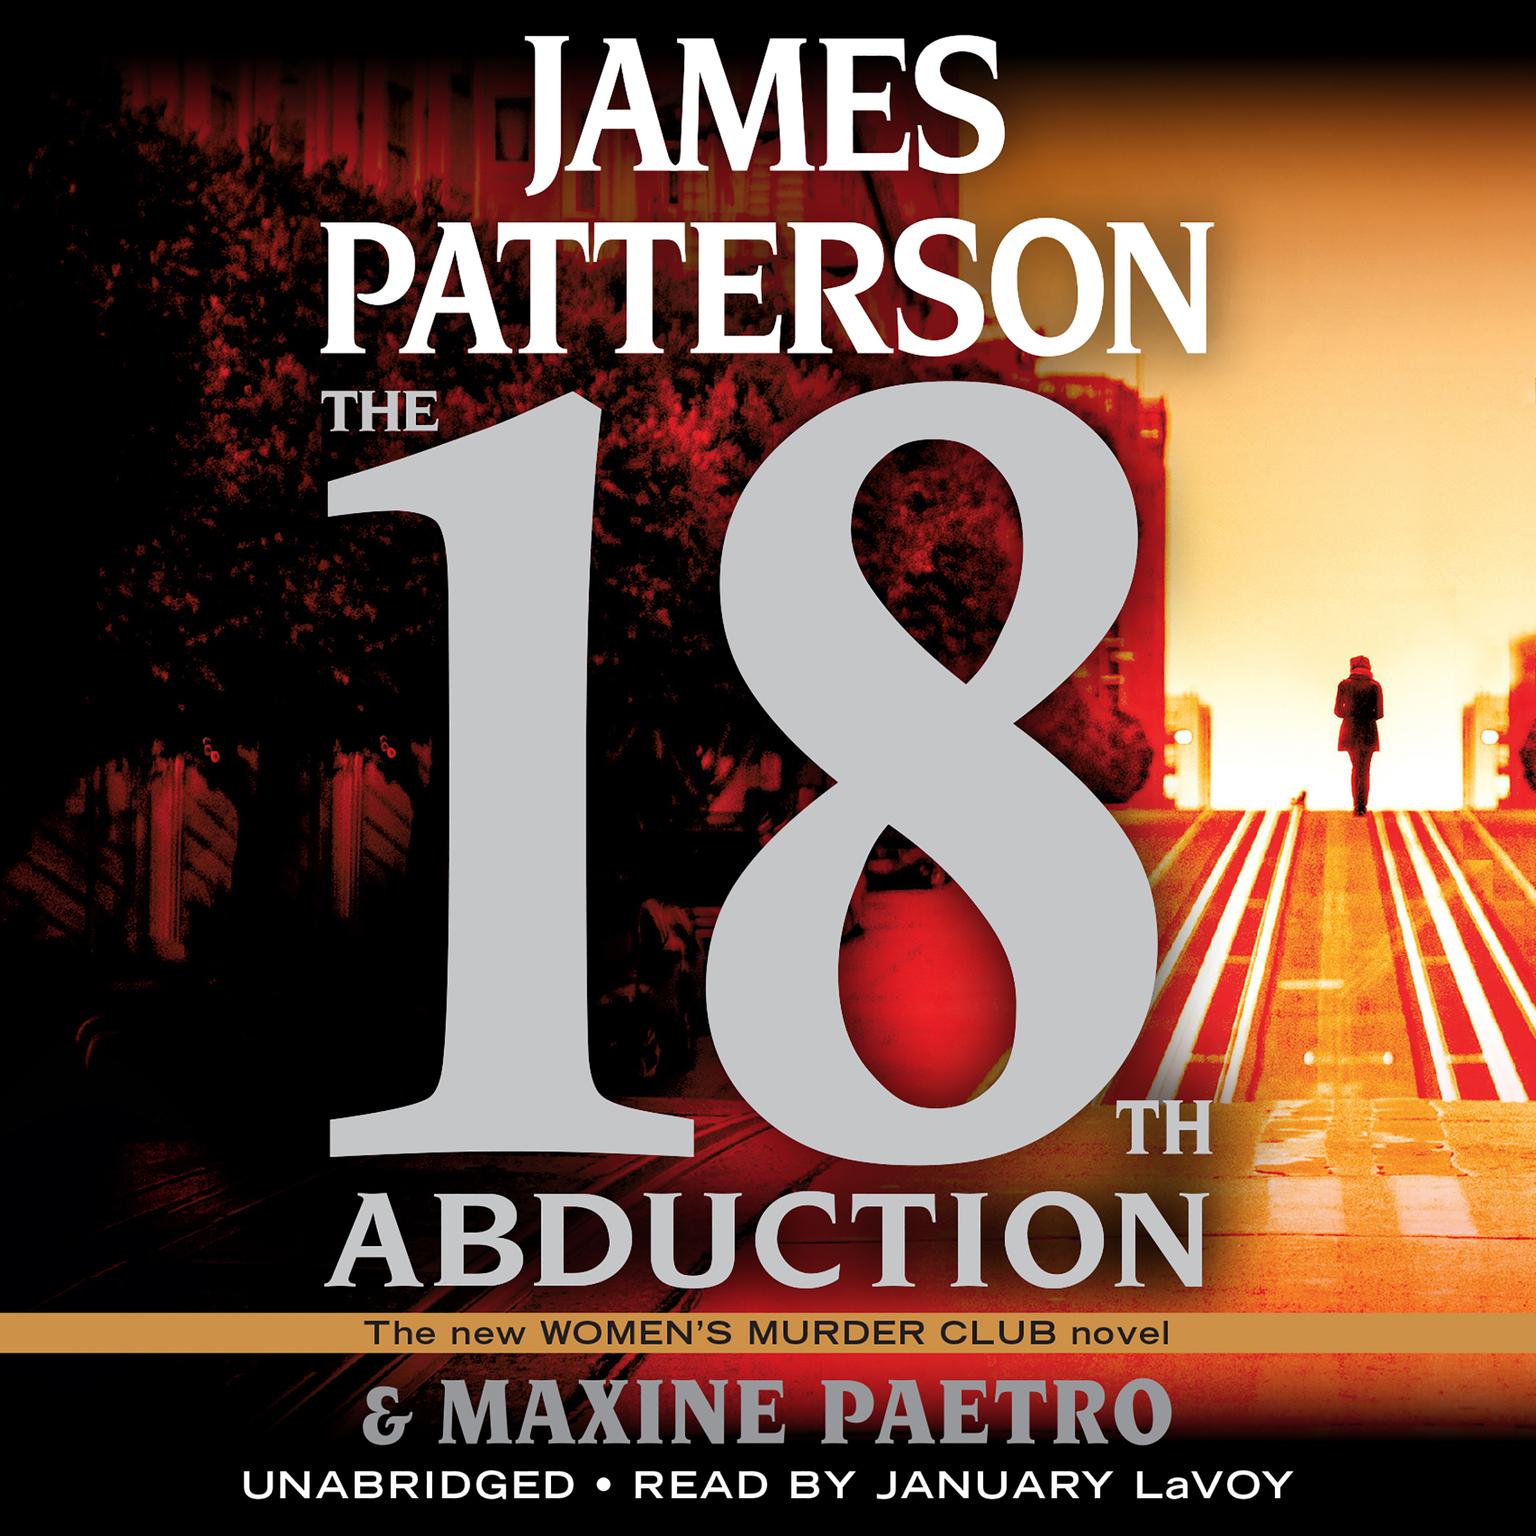 The 18th Abduction Audiobook, by James Patterson